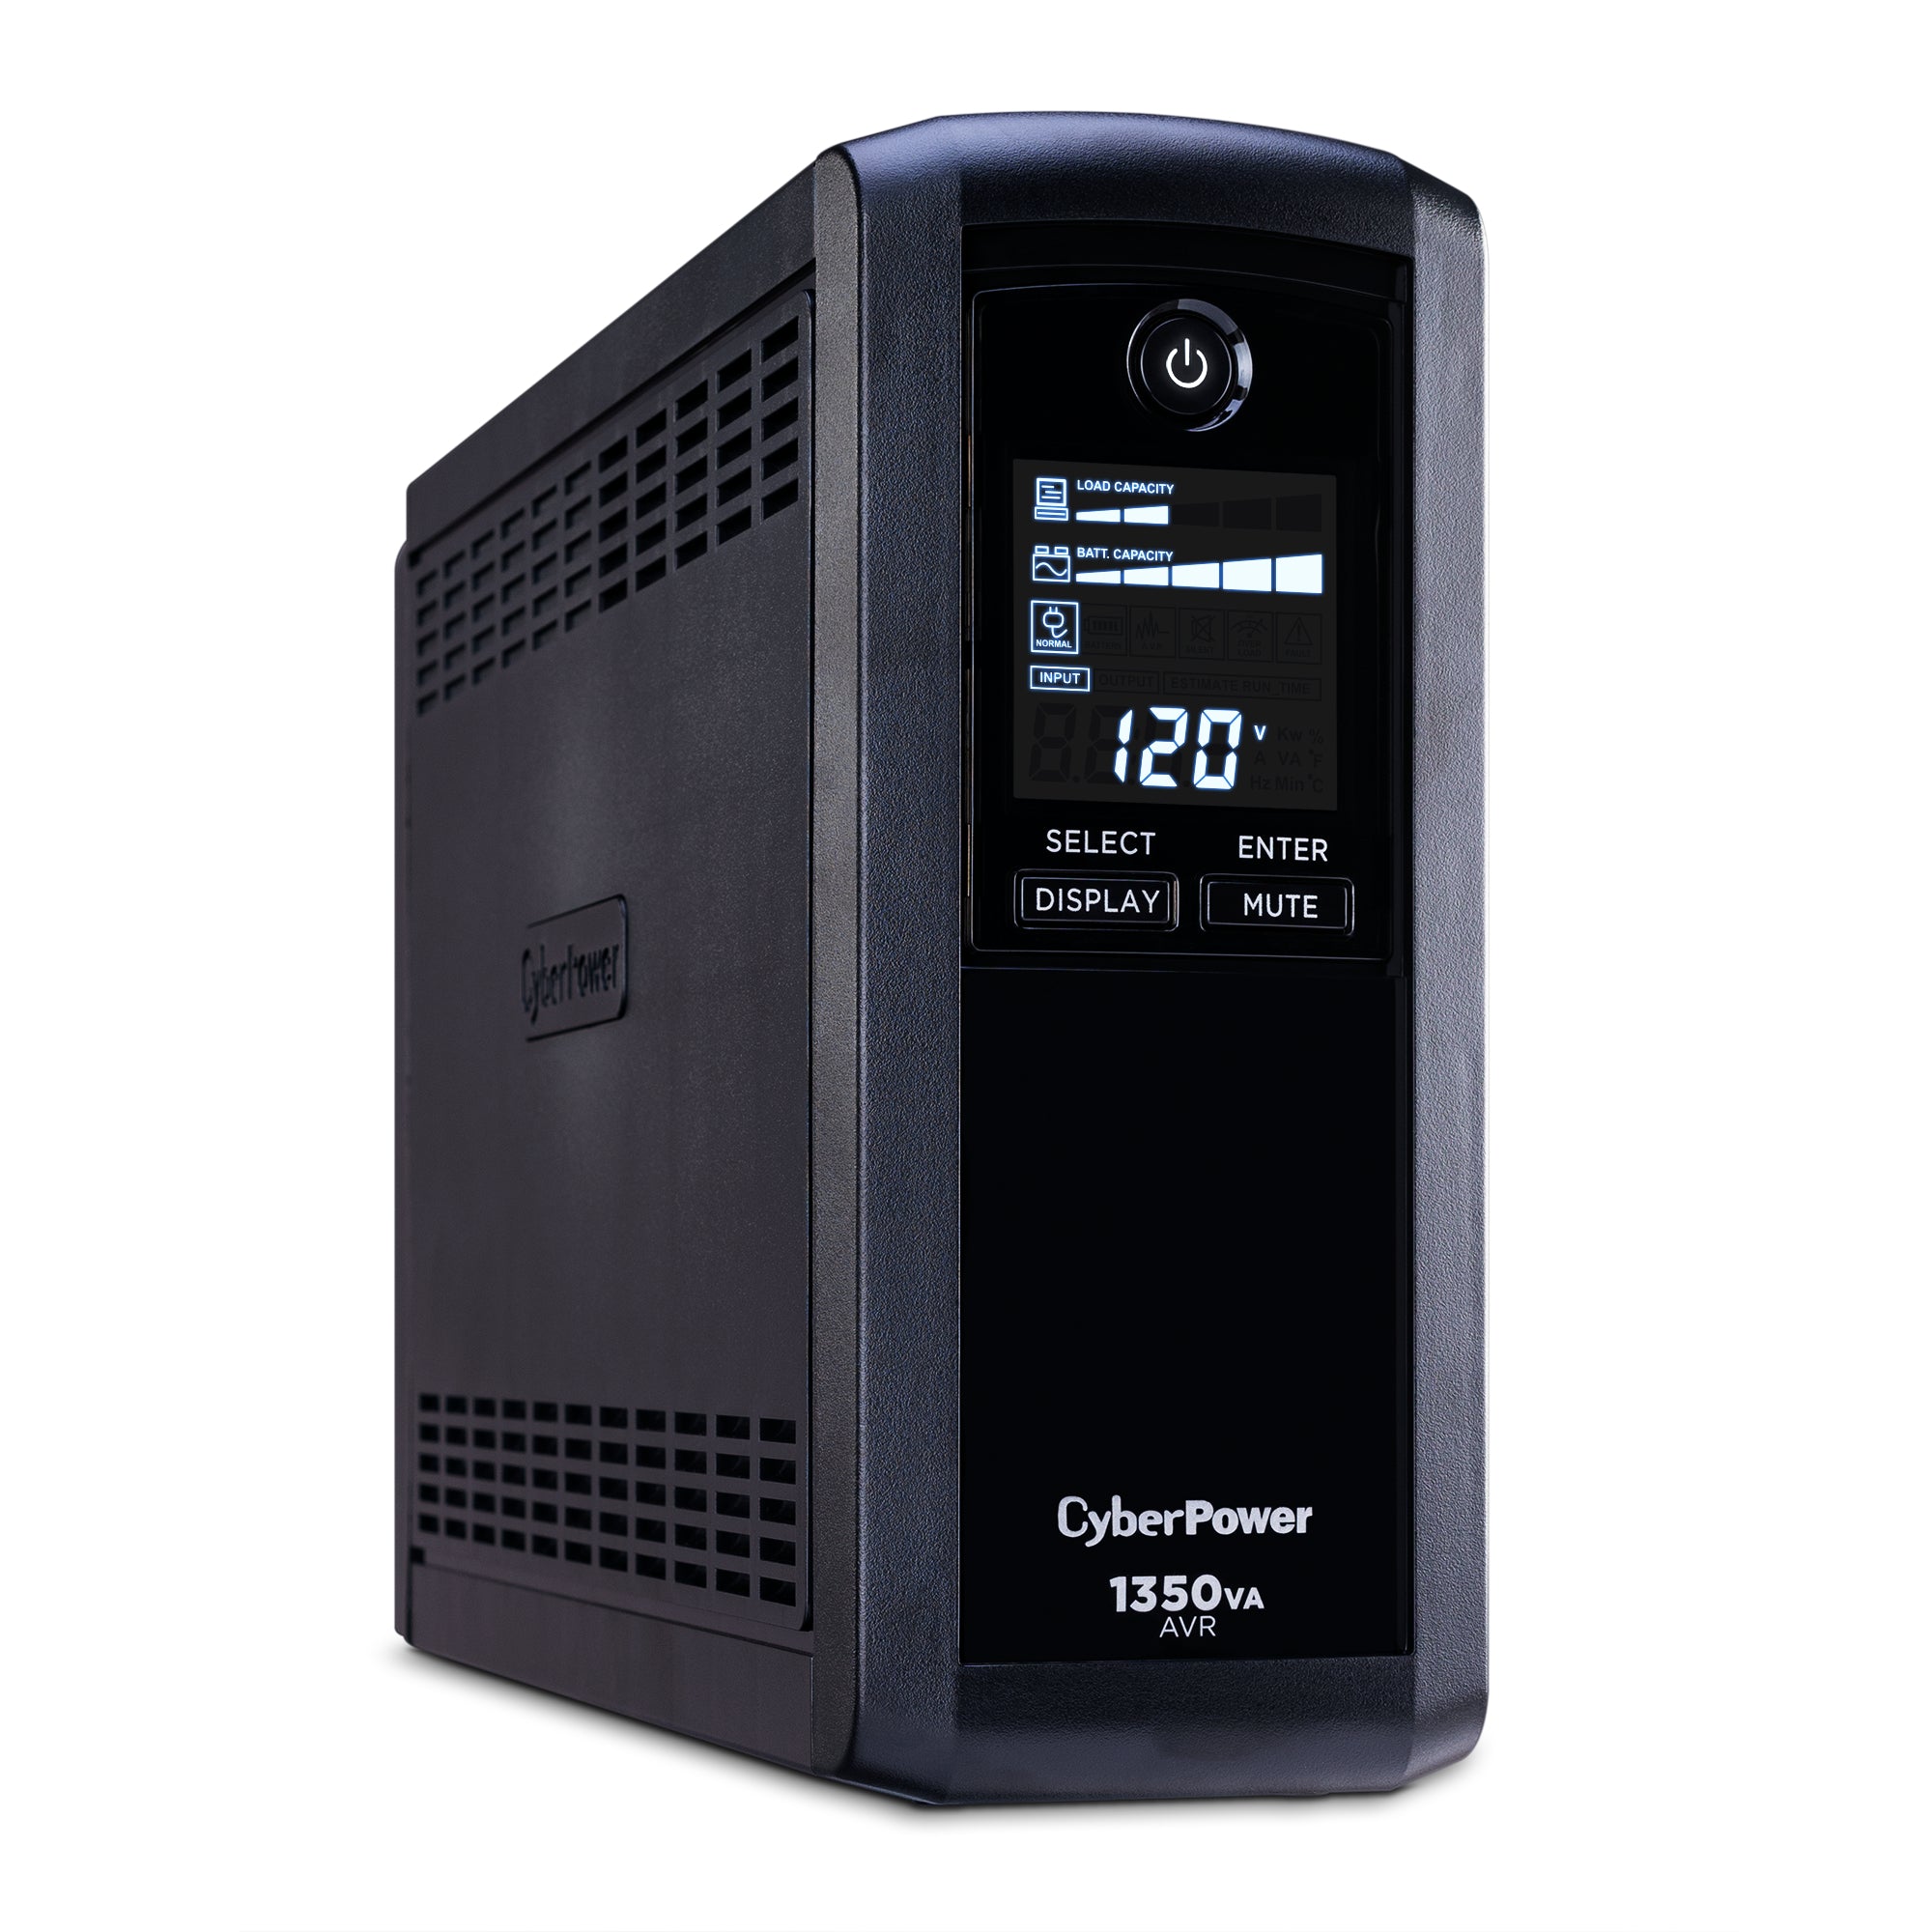 CyberPower CP1350AVRLCD-R Intelligent LCD UPS System - New Battery Certified Refurbished